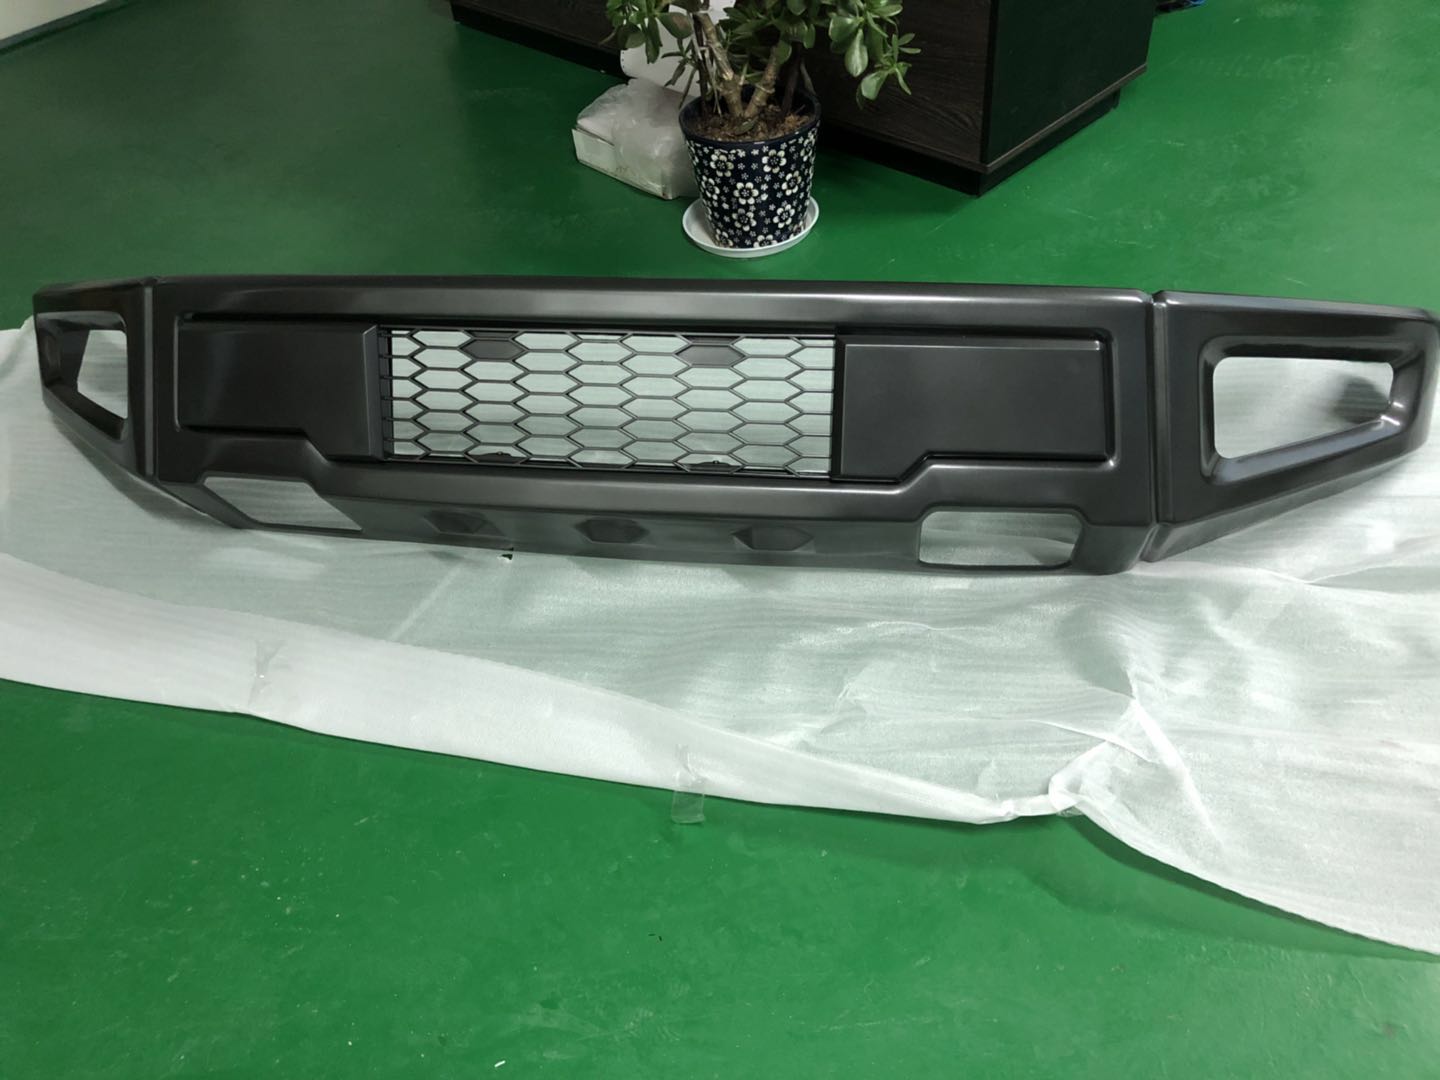 Used for 15-17 F150 front bumper